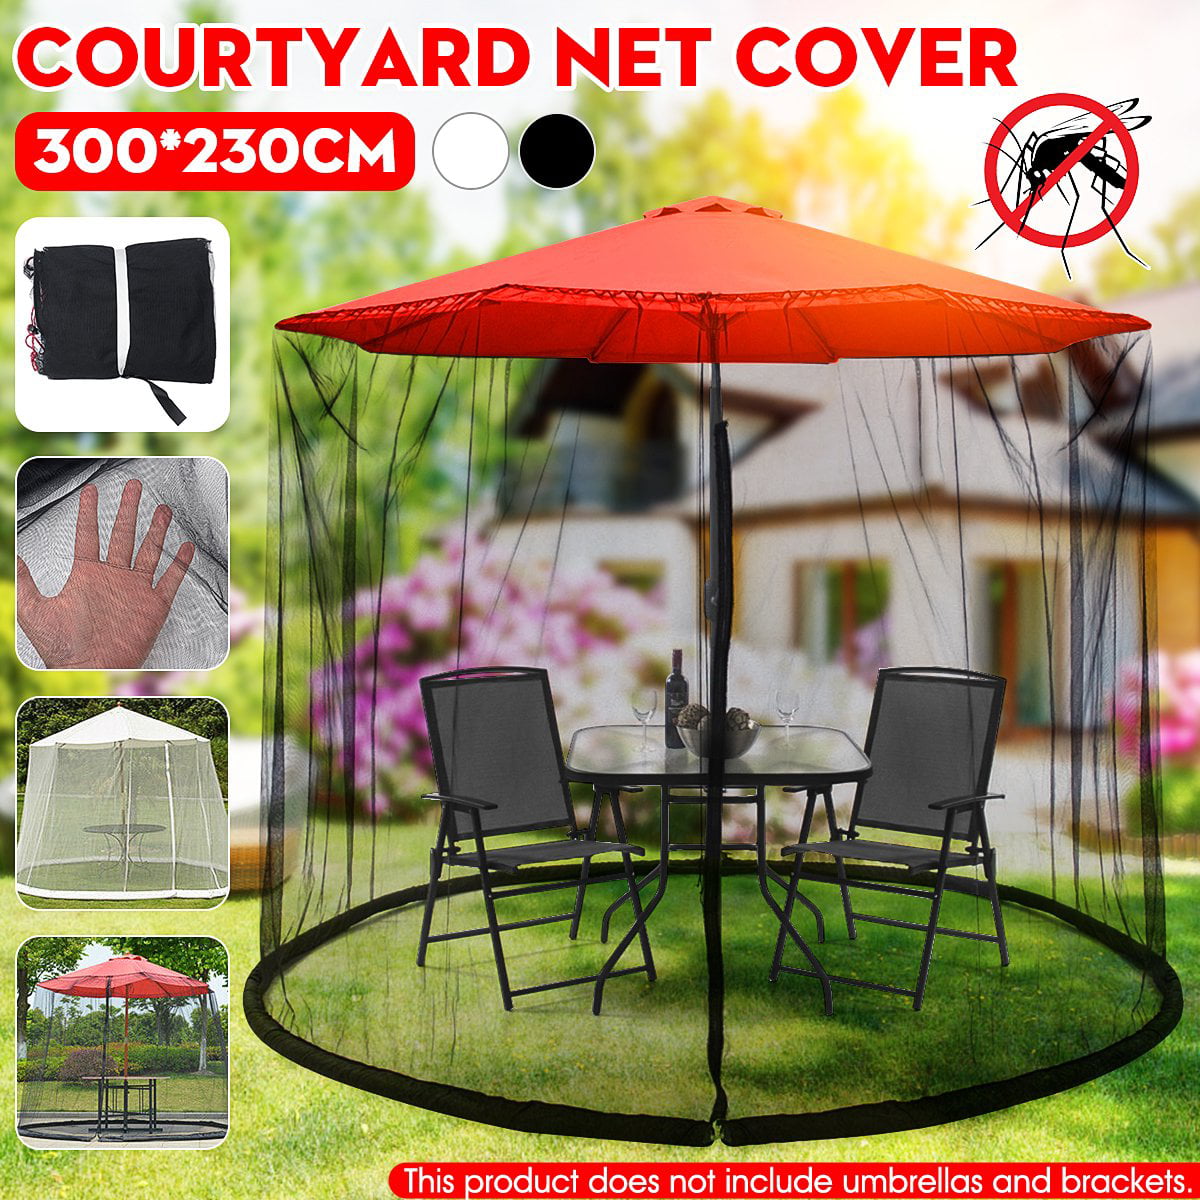 Fits Umbrellas and Patio Tables Cantilever Mosquito Net Garden Parasol Mosquito Net Cover Bug 118x91in Helps Protect from Mosquitoes 